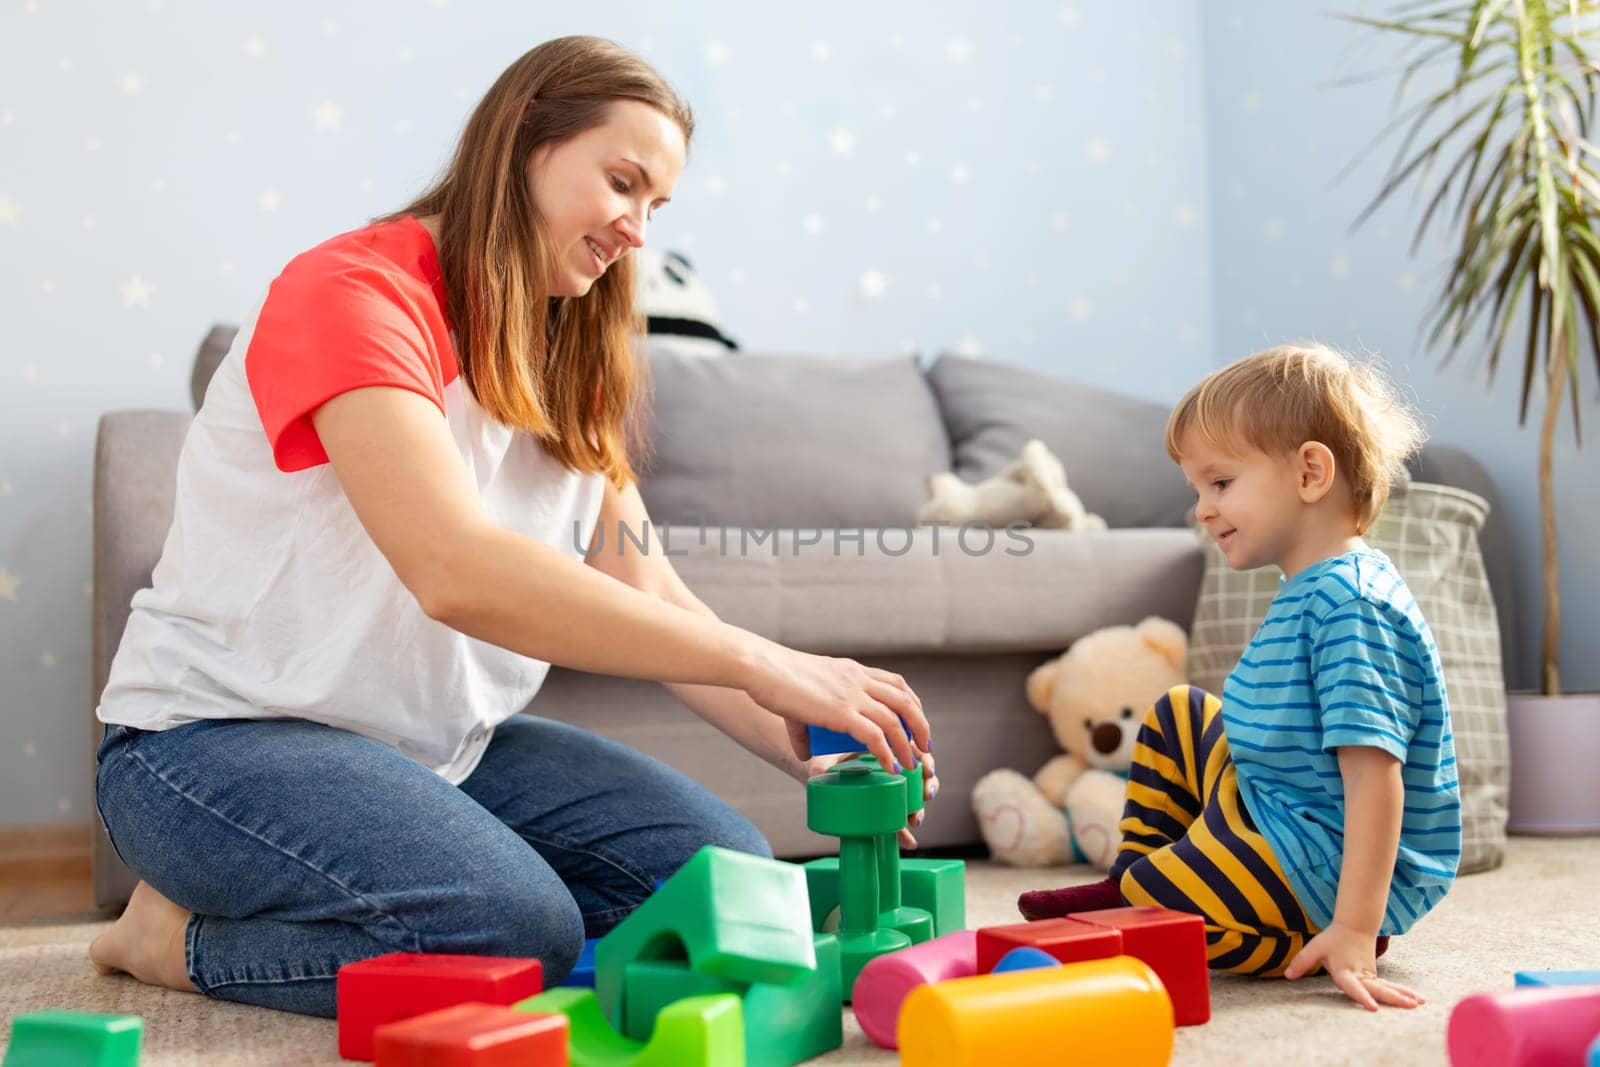 Kid and child development specialist playing together with colorful blocks by andreyz